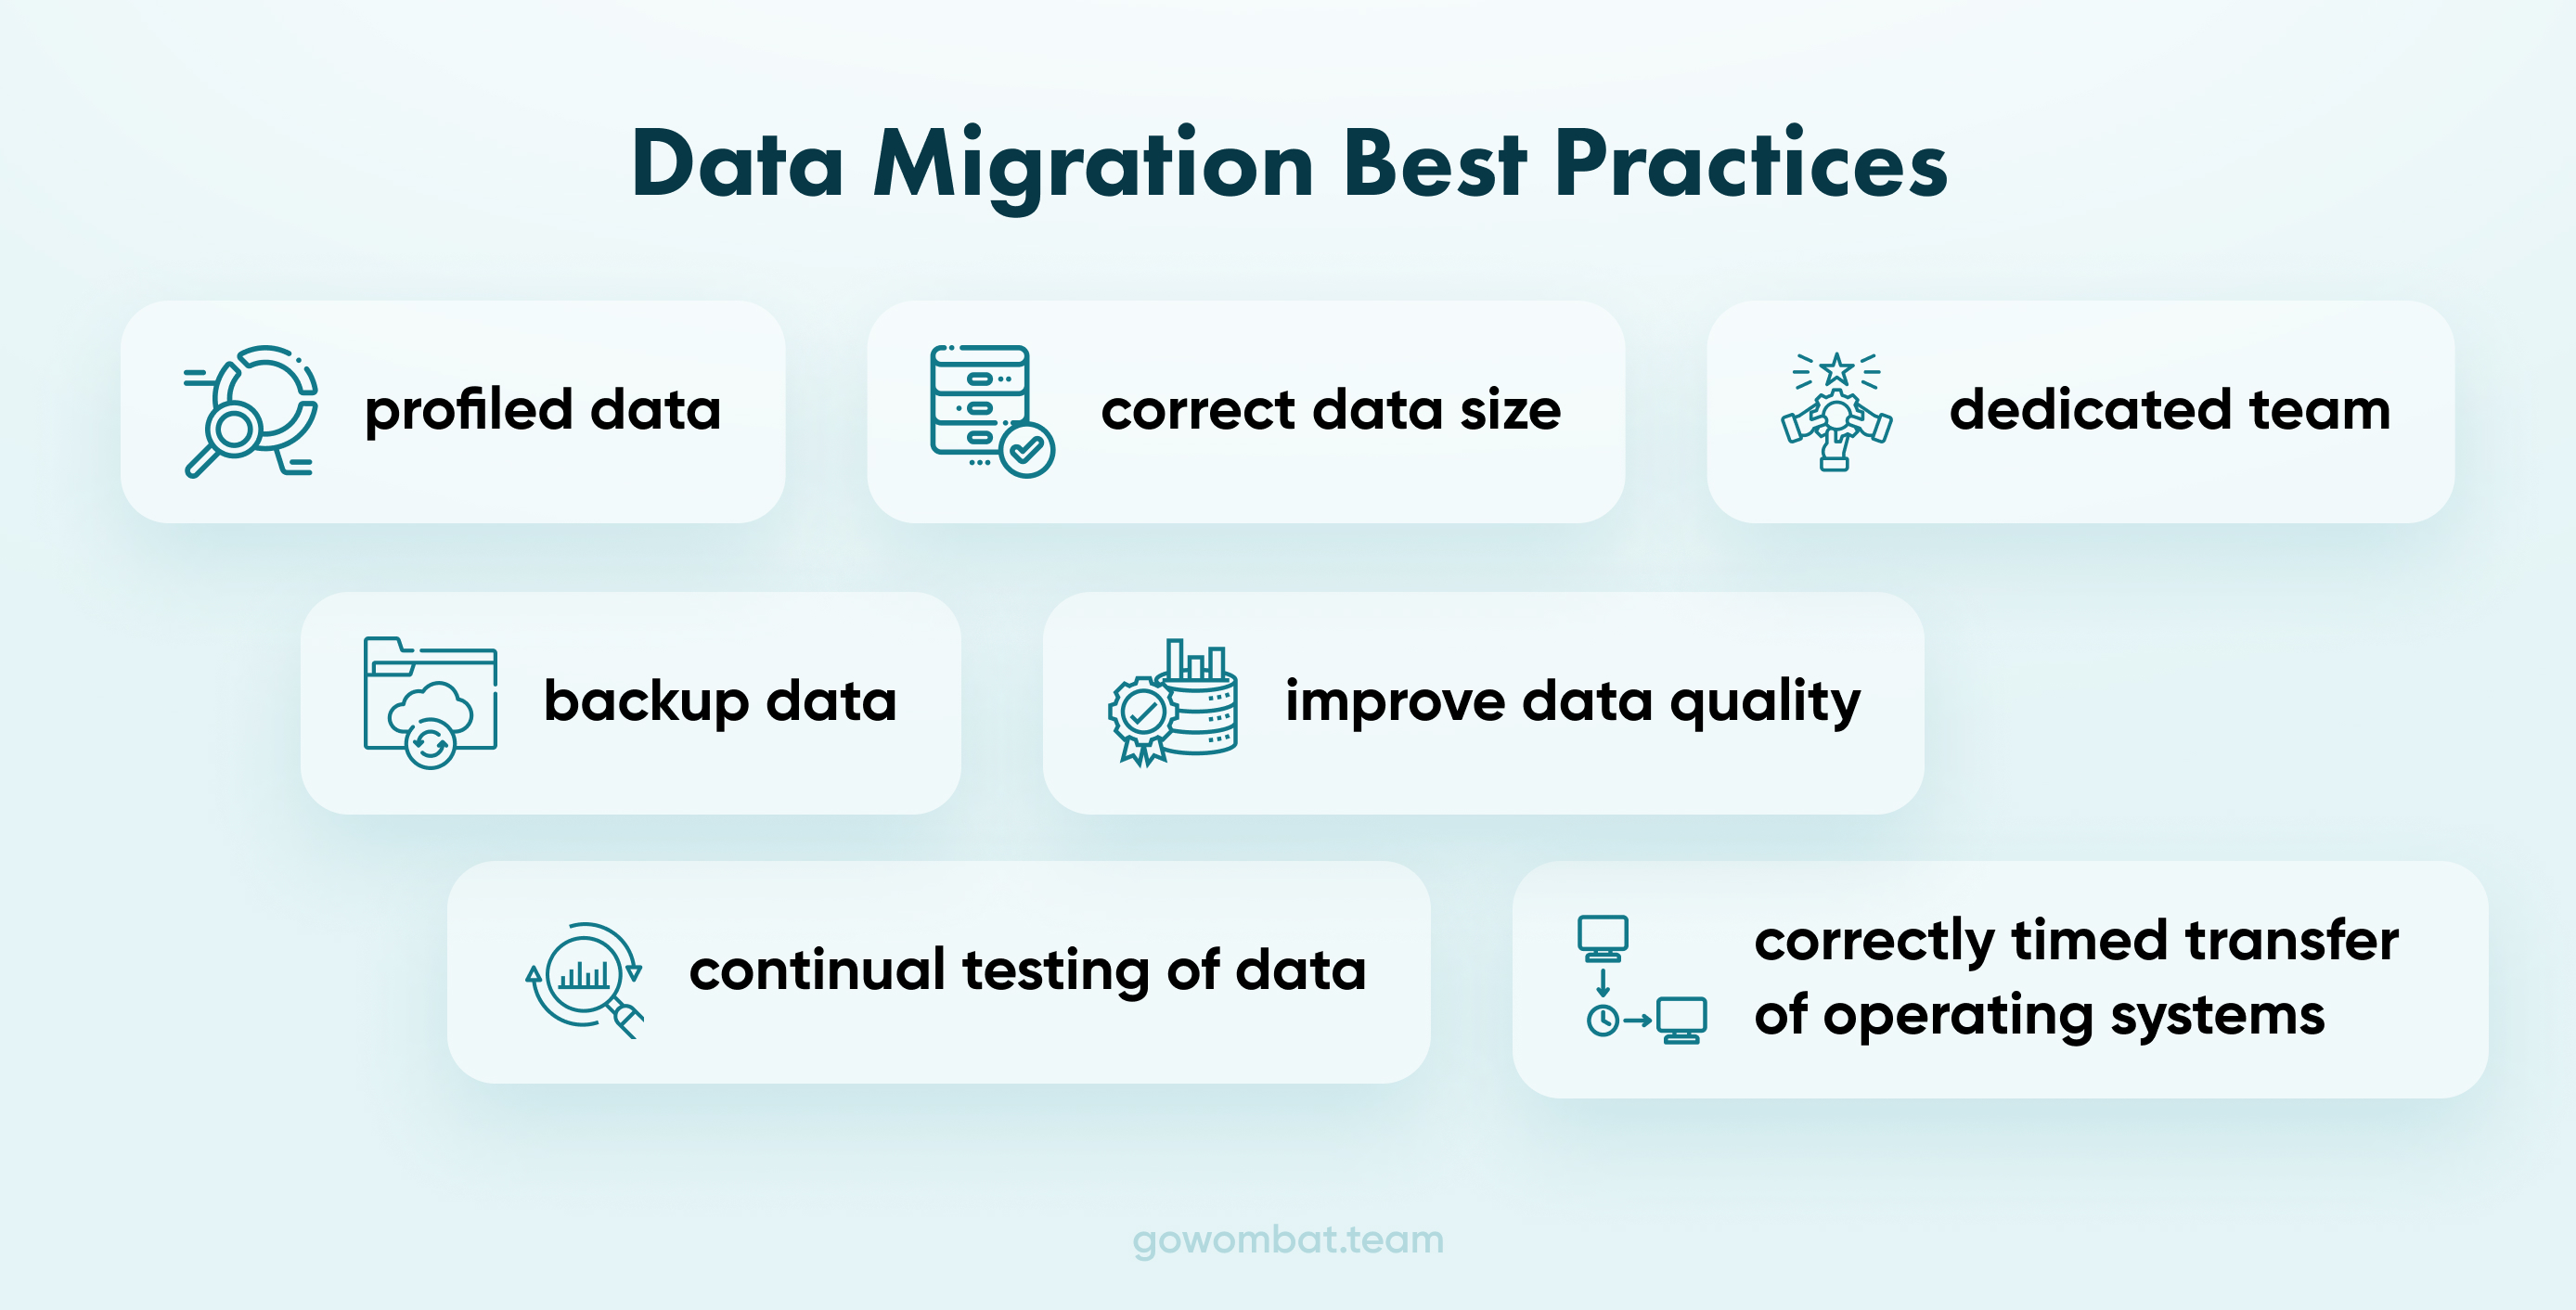 Data migration can be a complex operation, discover here the considered data migration best practices.